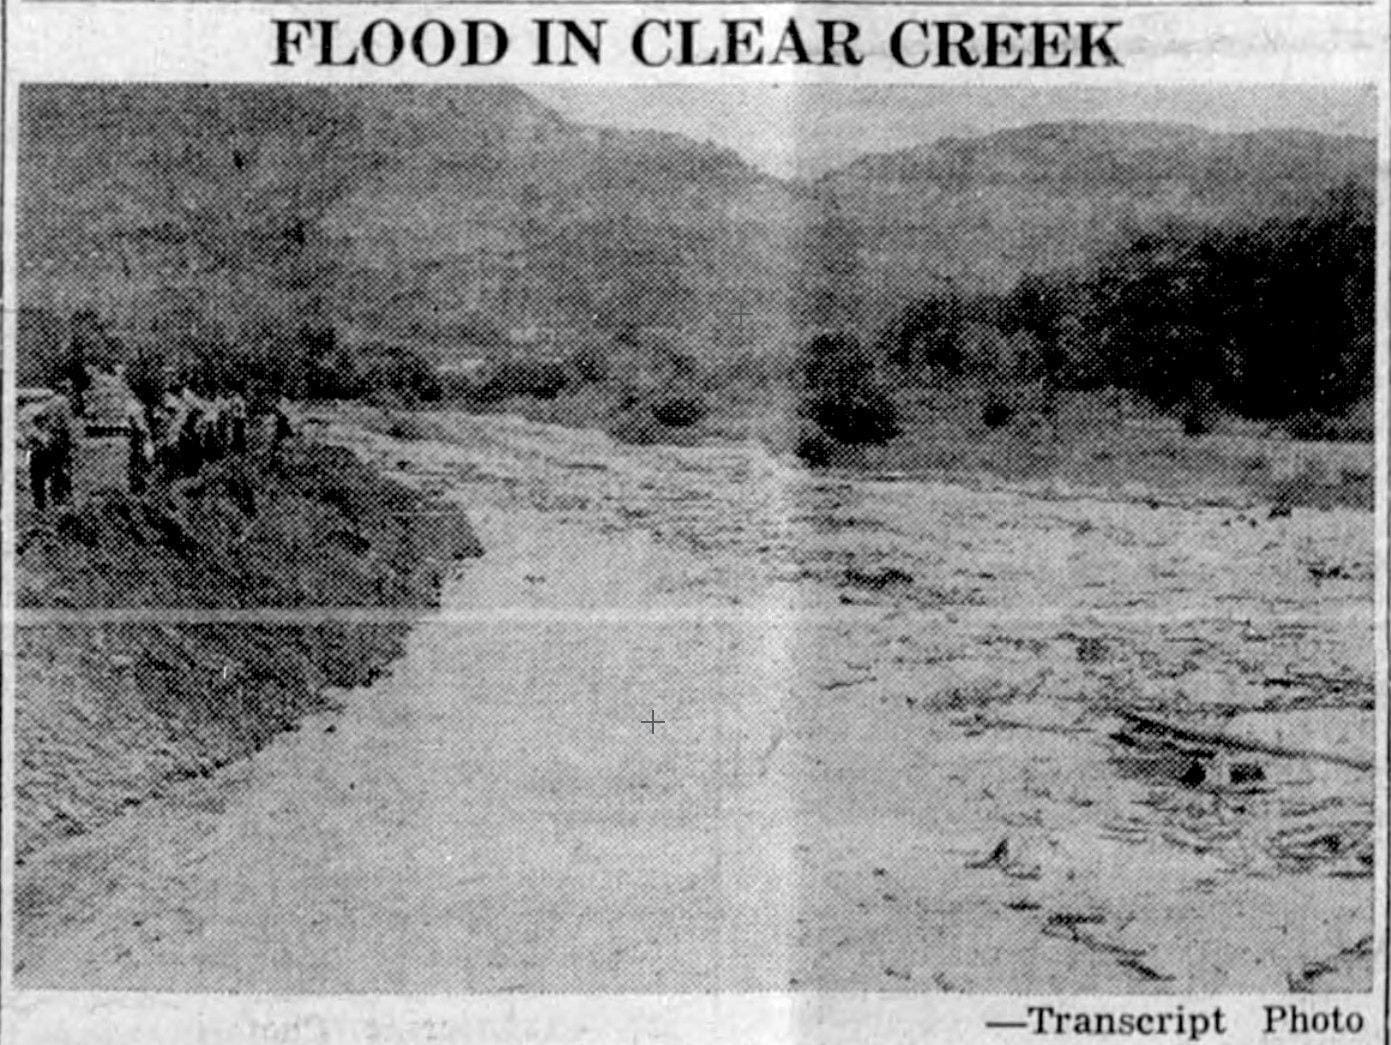 fuzzy newspaper image showing people on the south bank of Clear Creek, watching floodwater filled with debris